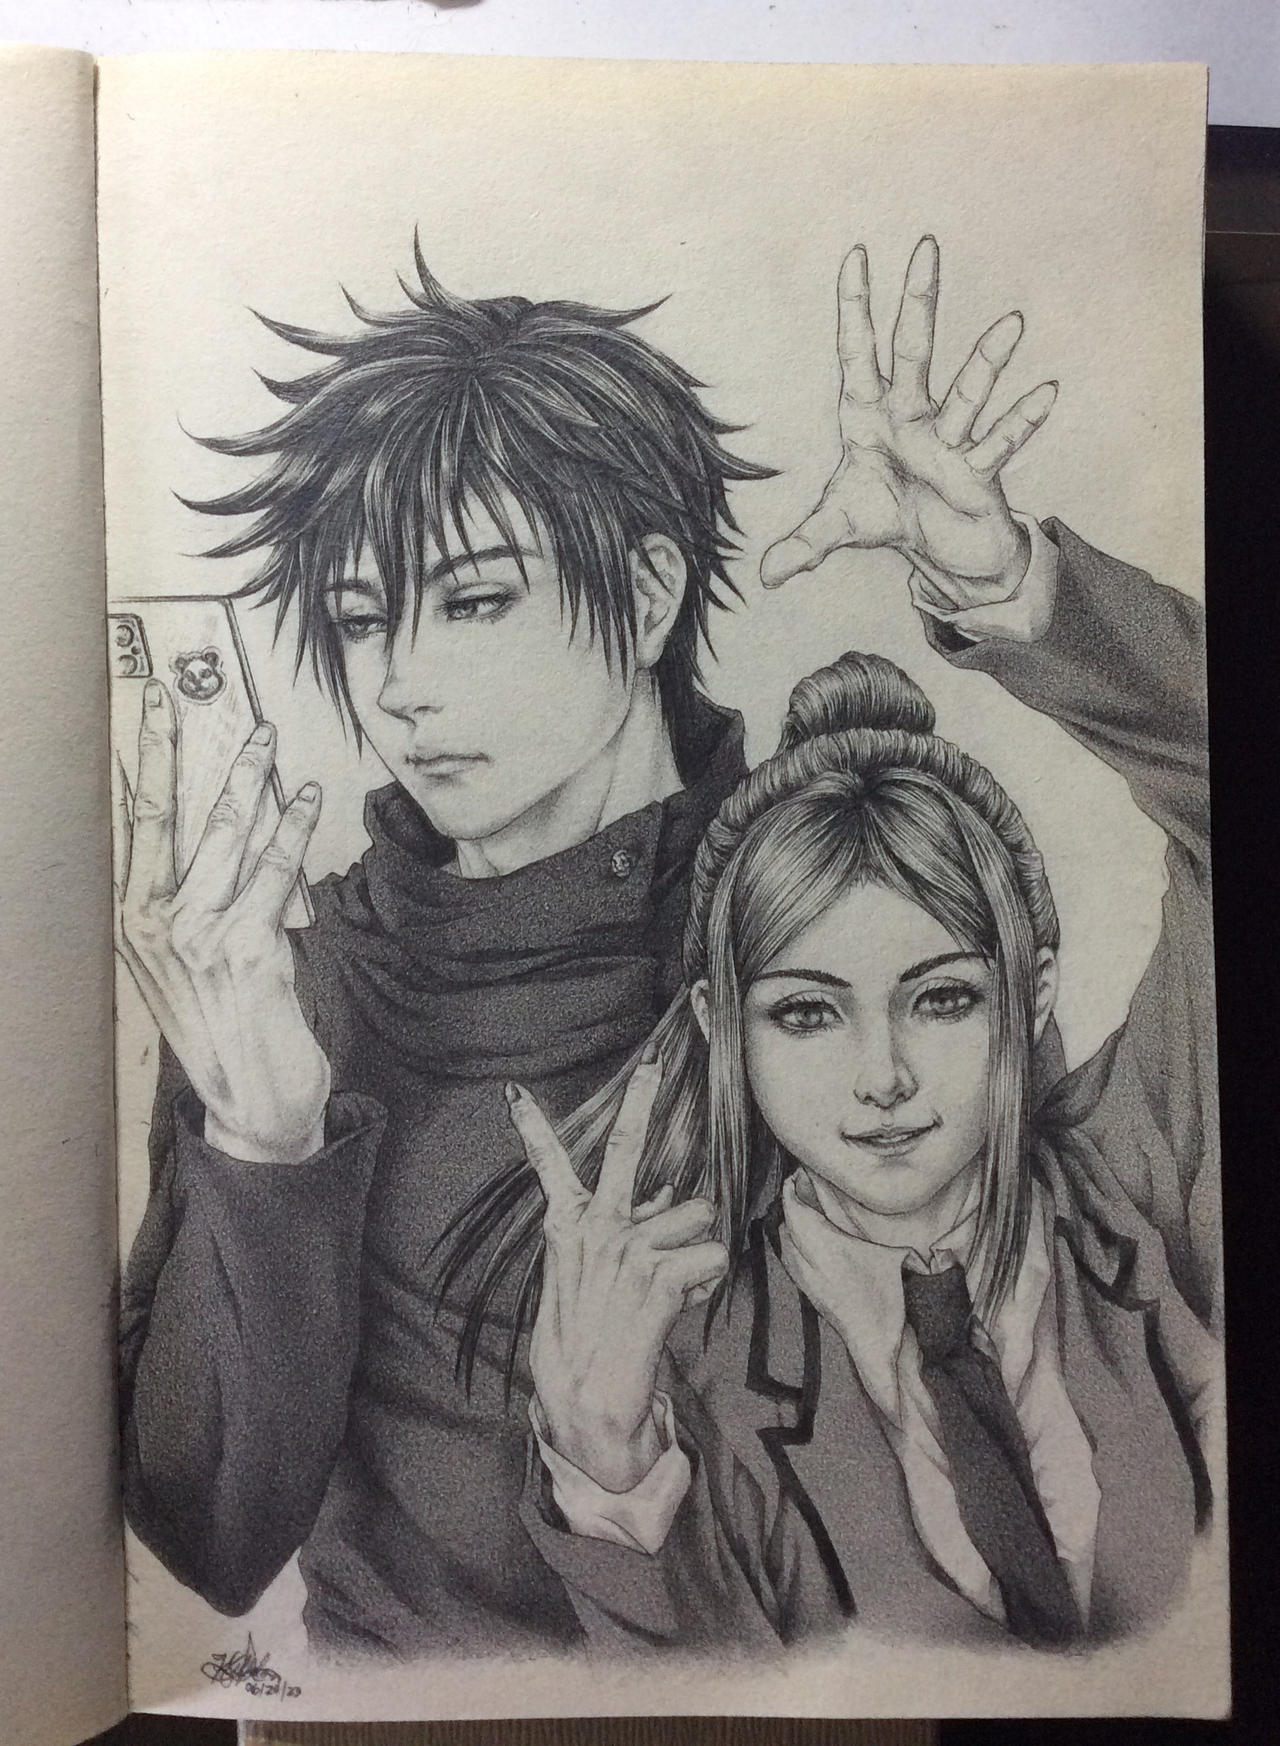 Art Trade: Aoshi and Megumi by lonelymiracle on DeviantArt